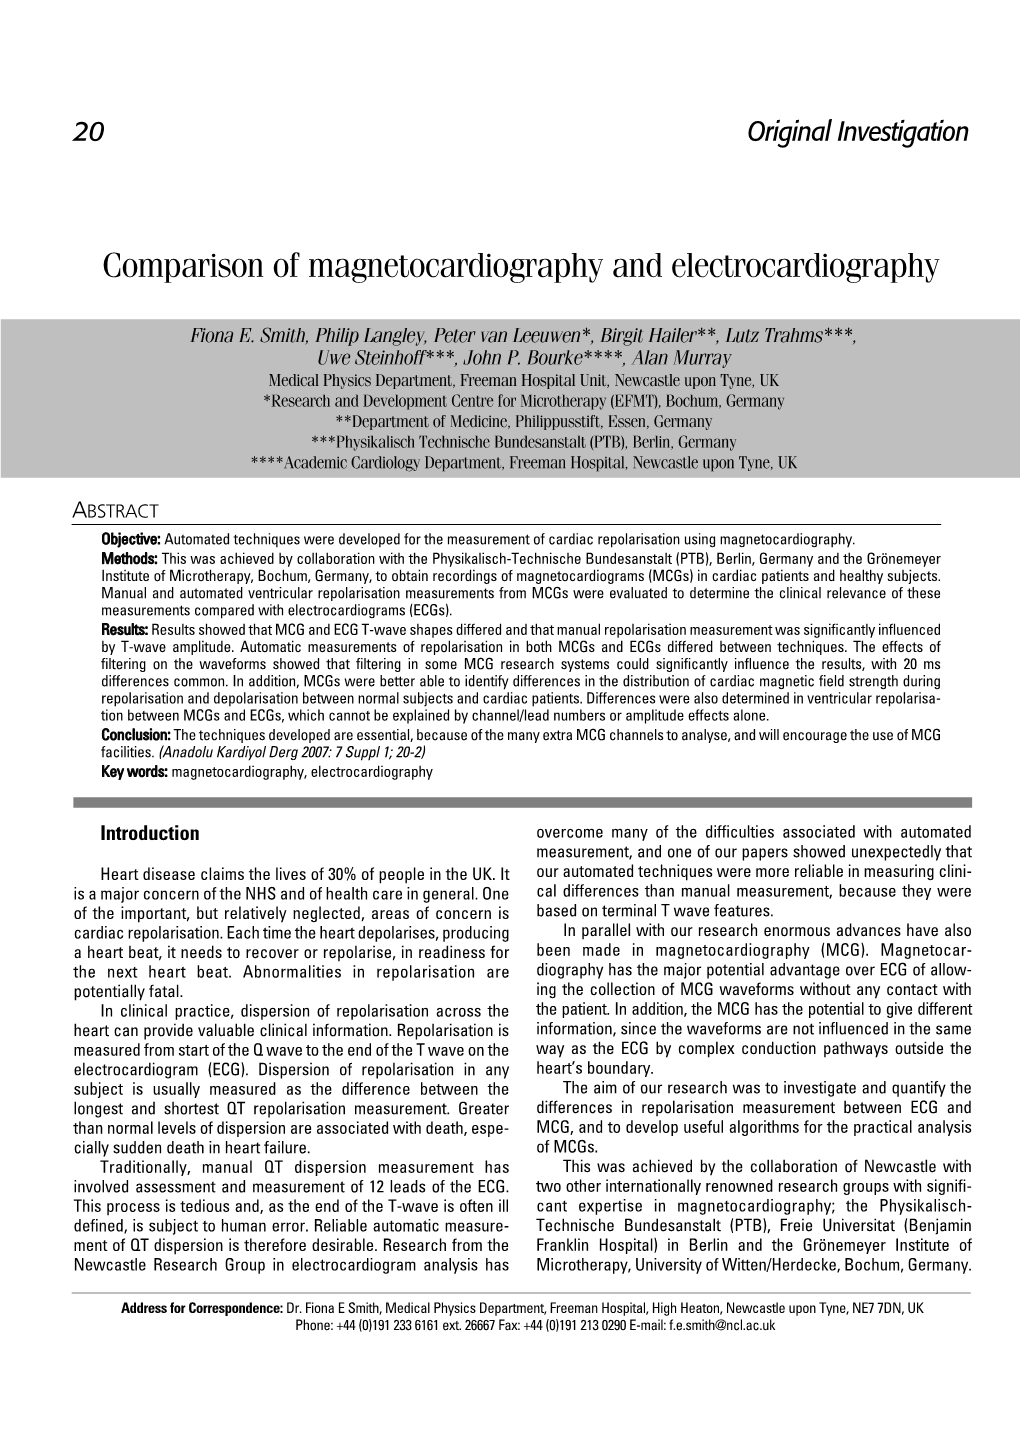 Comparison of Magnetocardiography and Electrocardiography